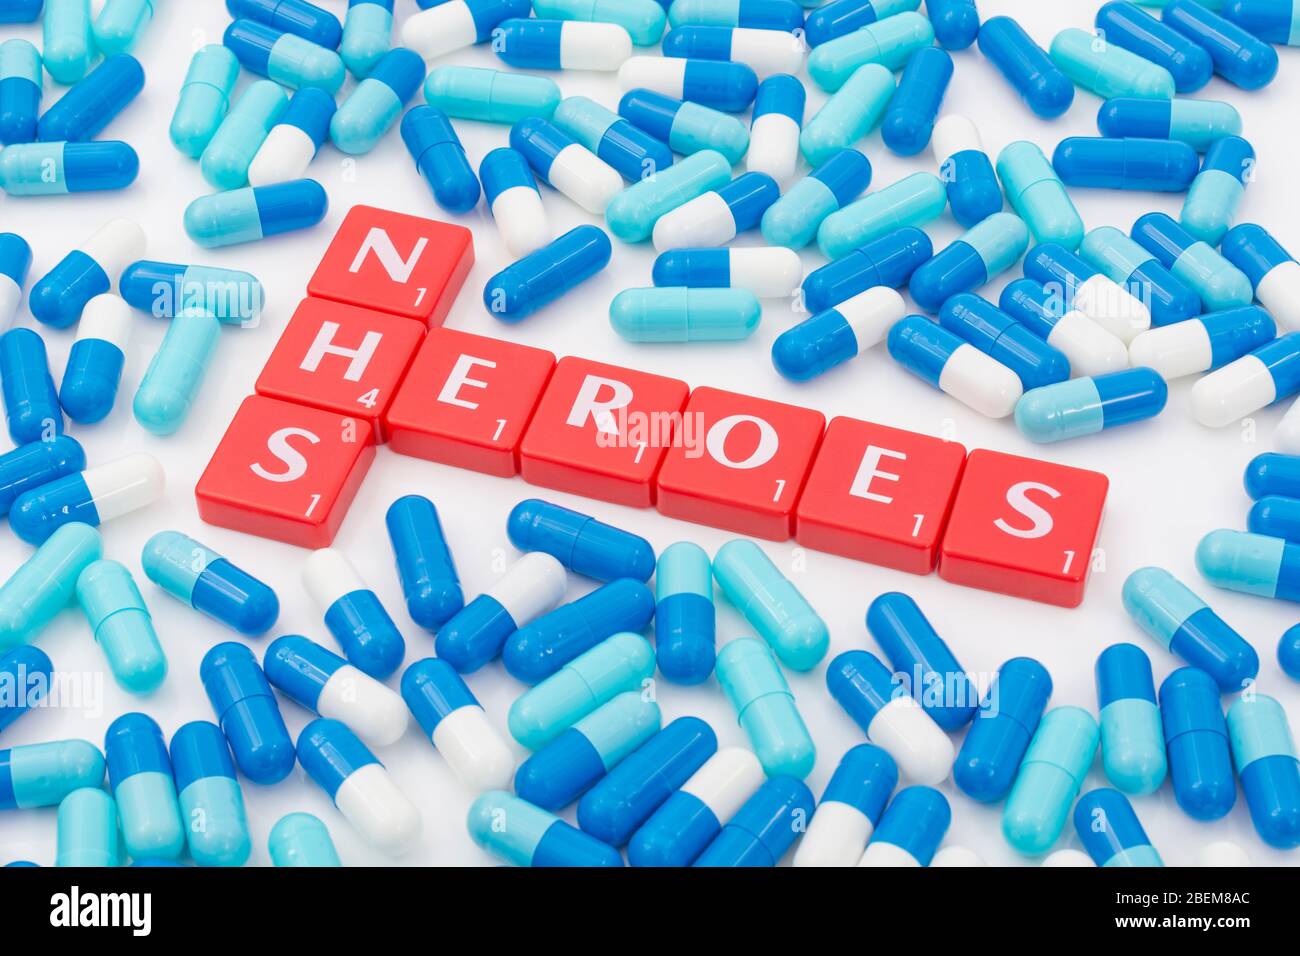 NHS Heroes letters tiles & assorted blue pills. For NHS in Covid 19 pandemic, NHS staff, NHS prescriptions, UK National Health Service, medicine in UK Stock Photo